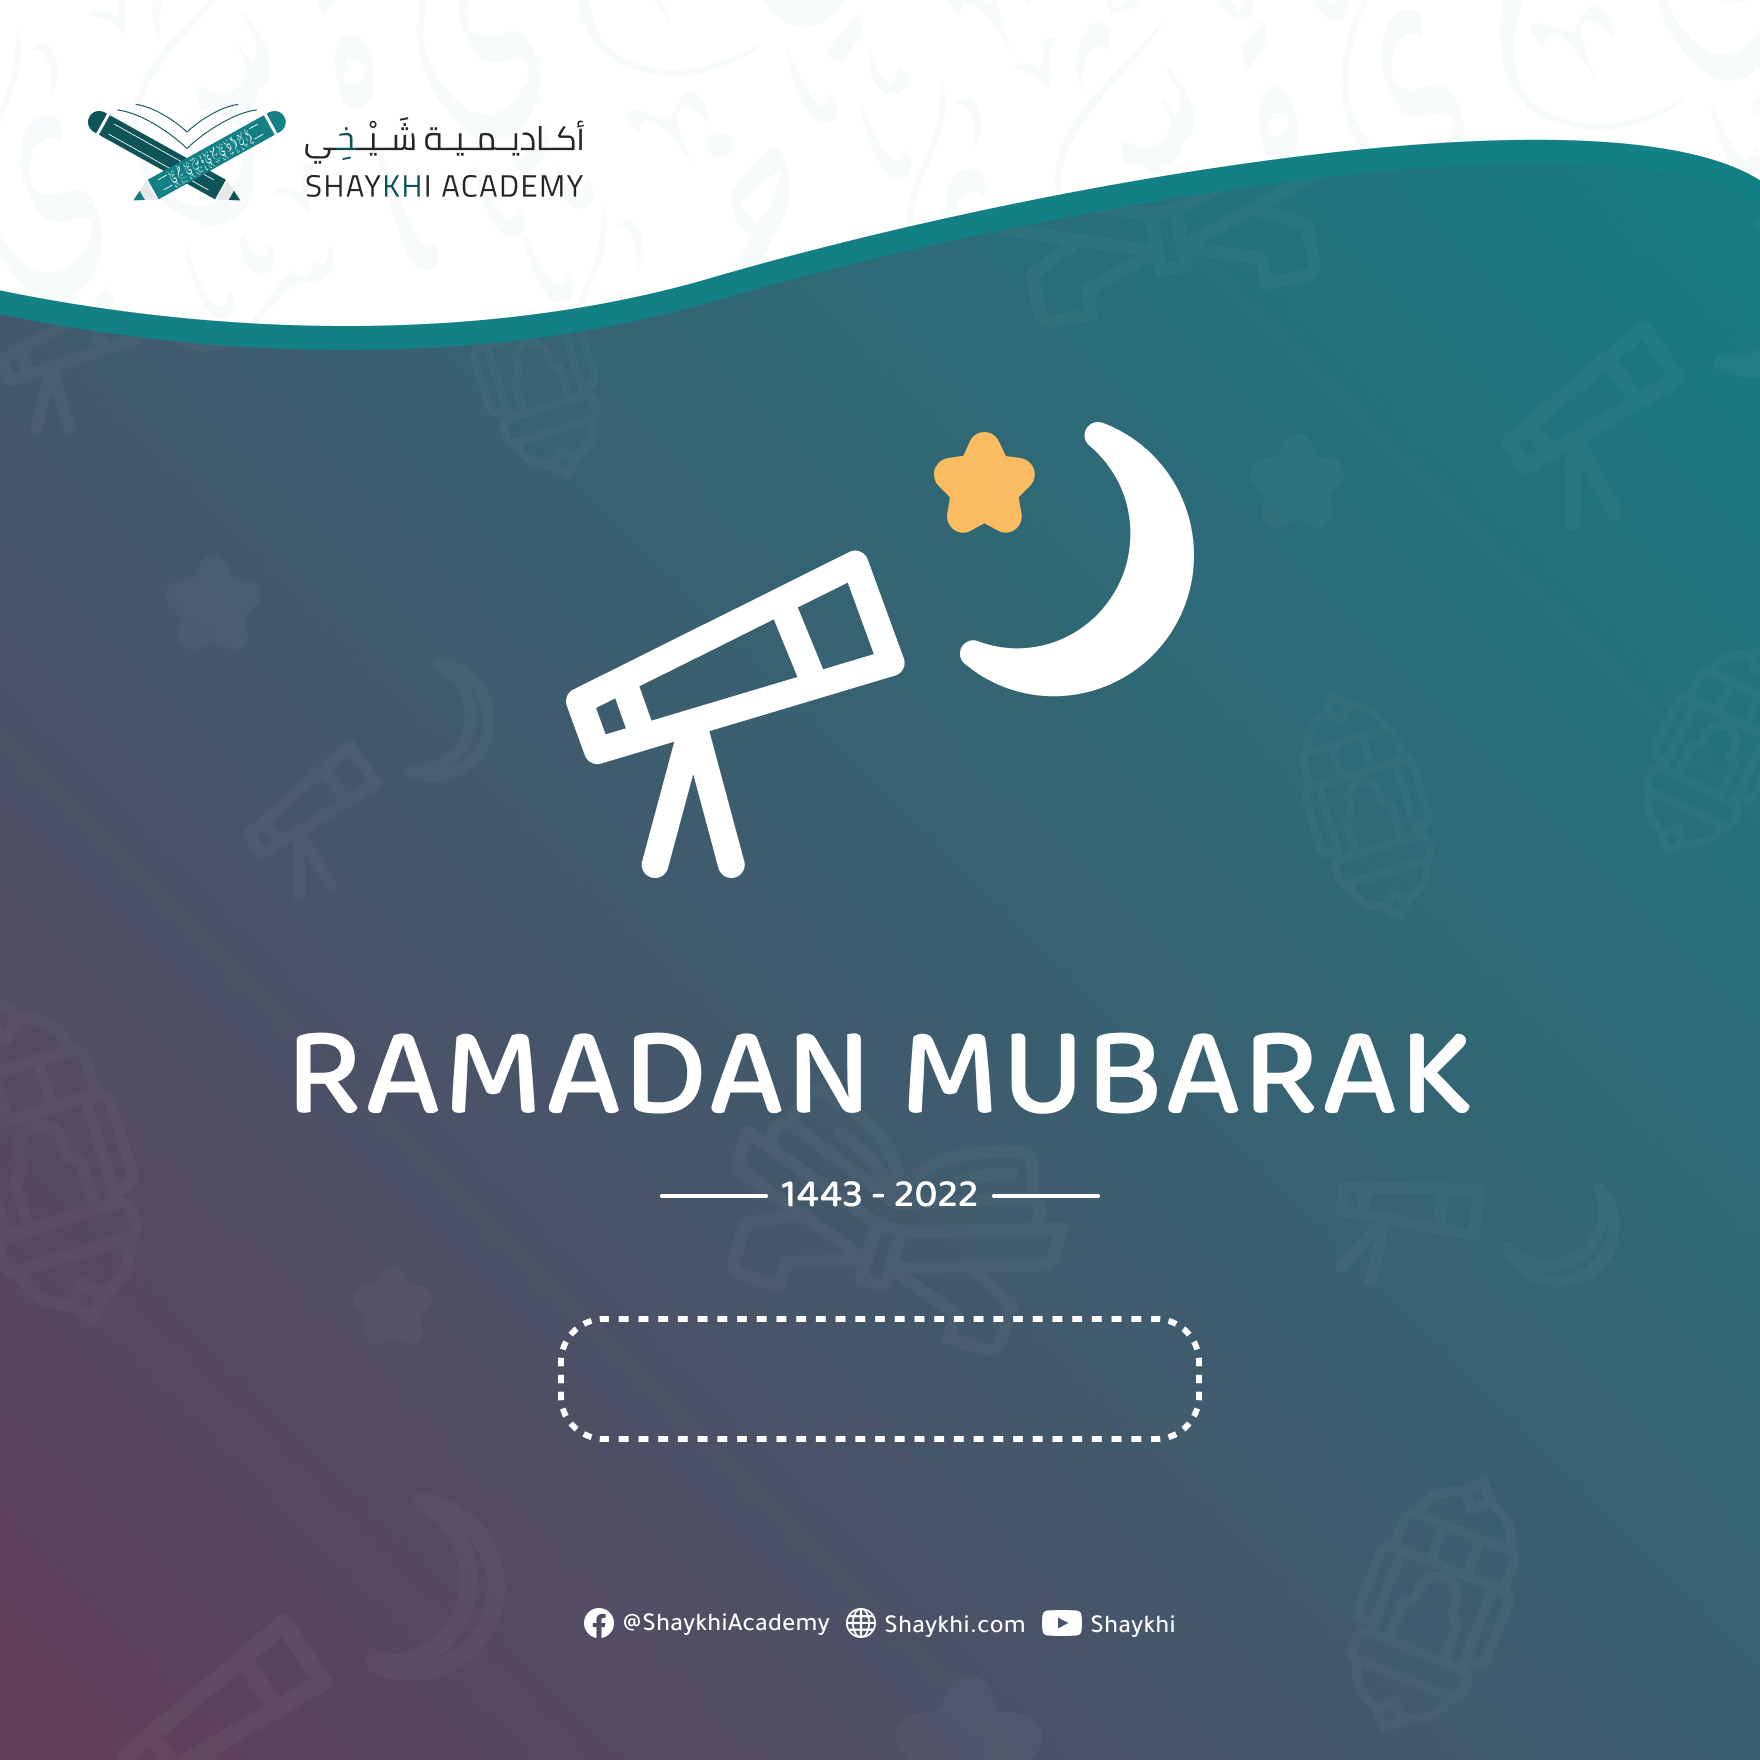 Ramadan Mubarak Images and Meaning - cards for Quran Students 5 Kids and teenagers template